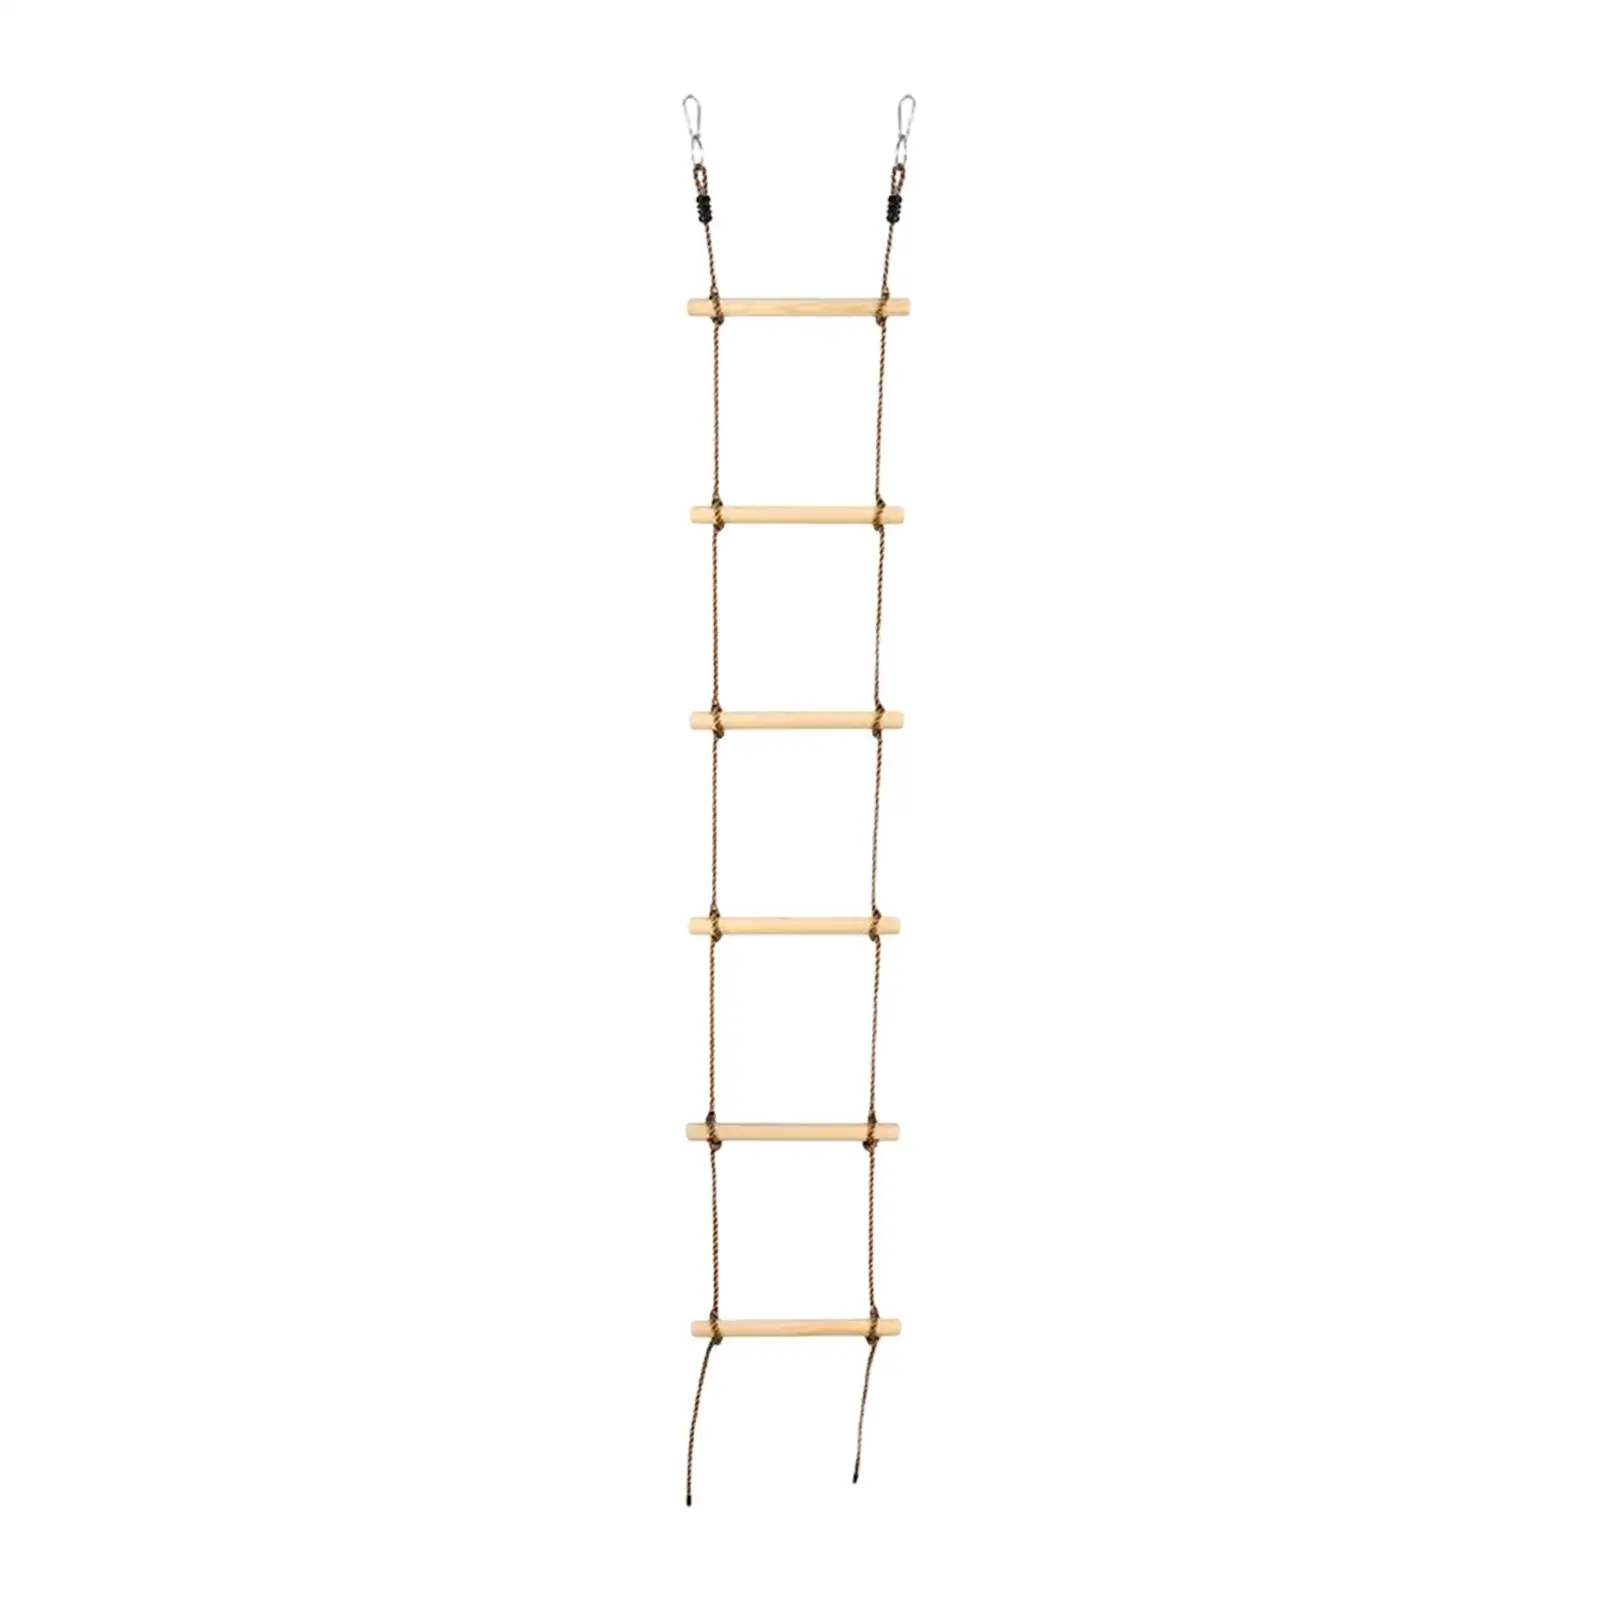 8 ft. Climbing Rope Ladder for Kids, DIY Swingset Addition for Indoor Play Equipment Fitness